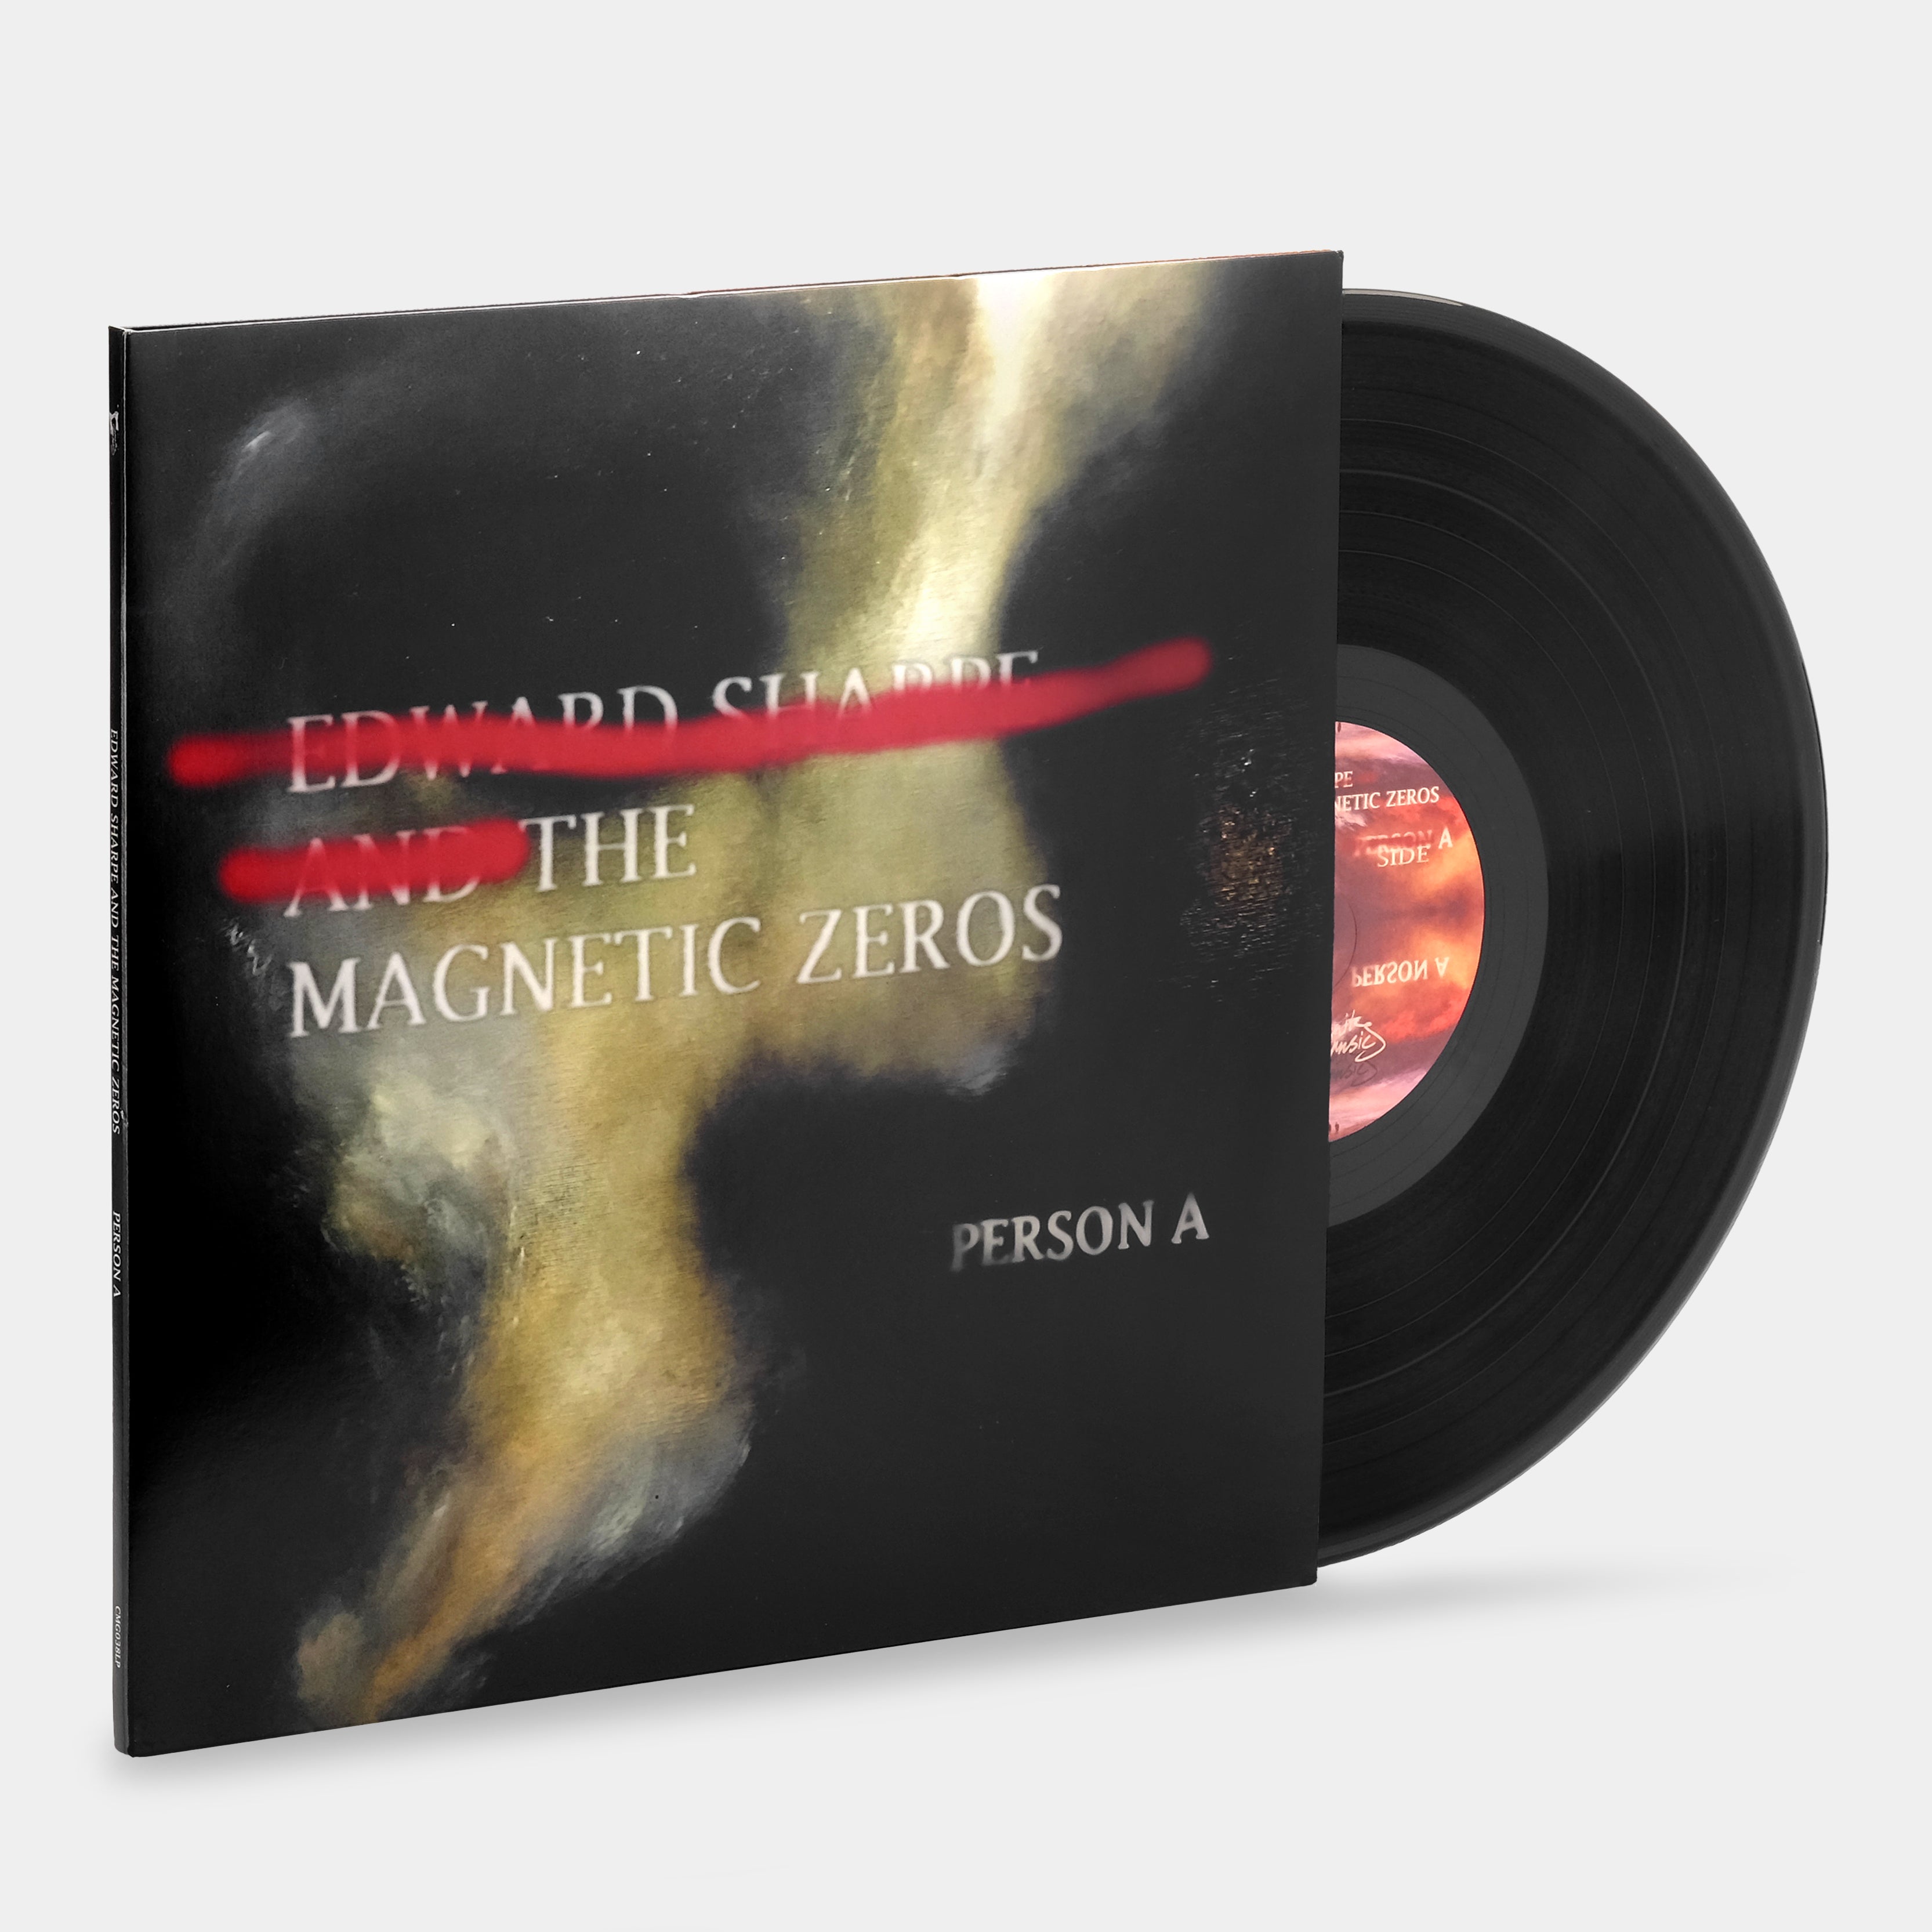 Edward Sharpe And The Magnetic Zeros - Person A LP Vinyl Record